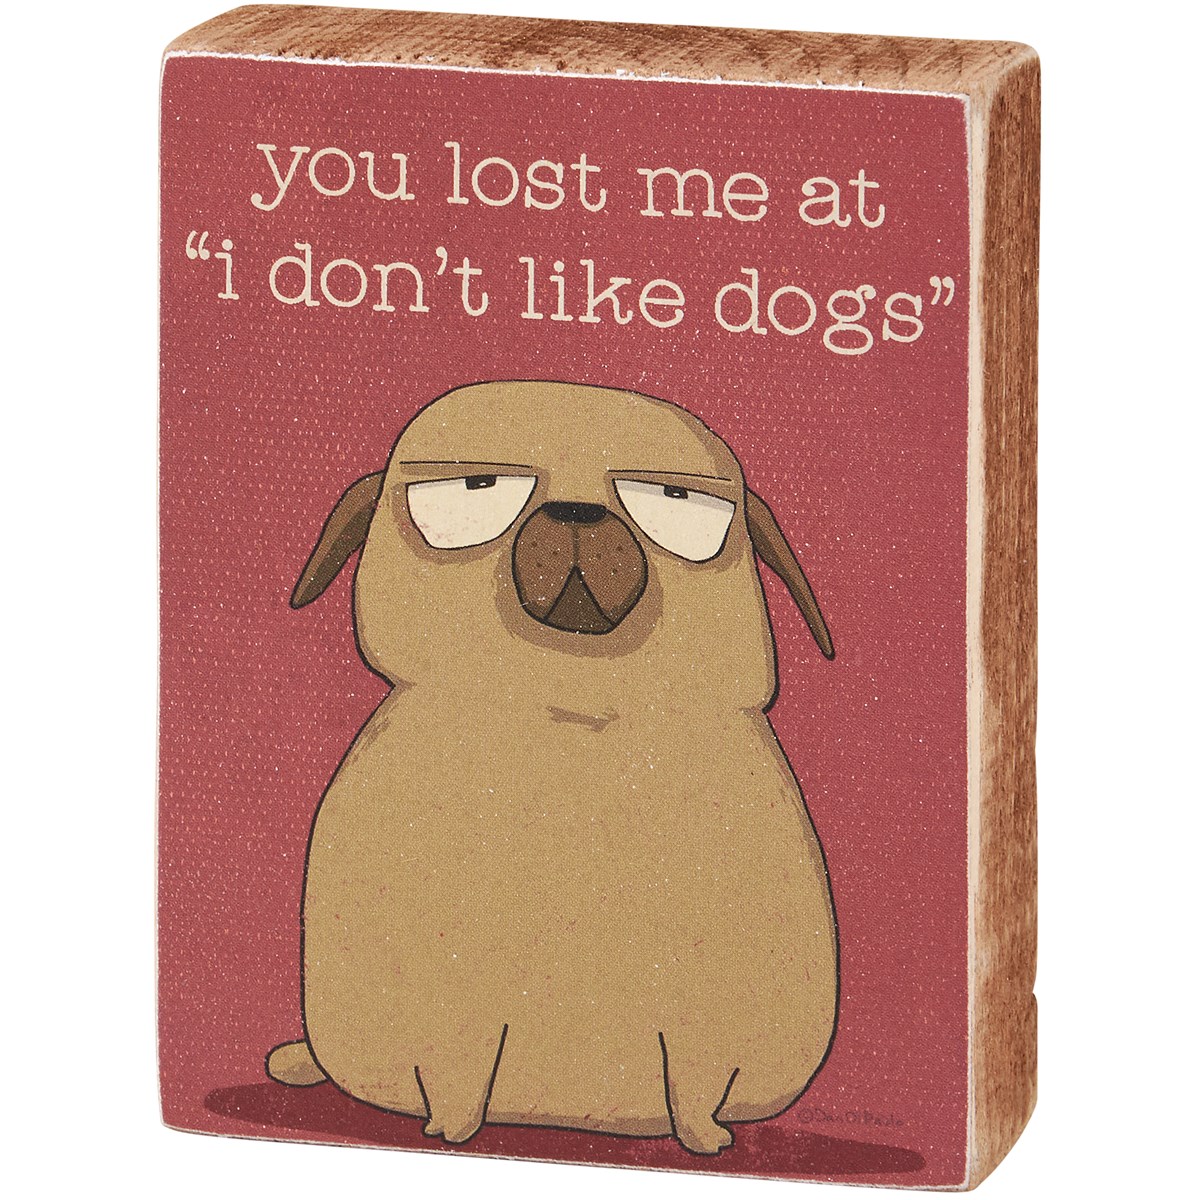 Don't Like Dogs Block Sign - Wood, Paper